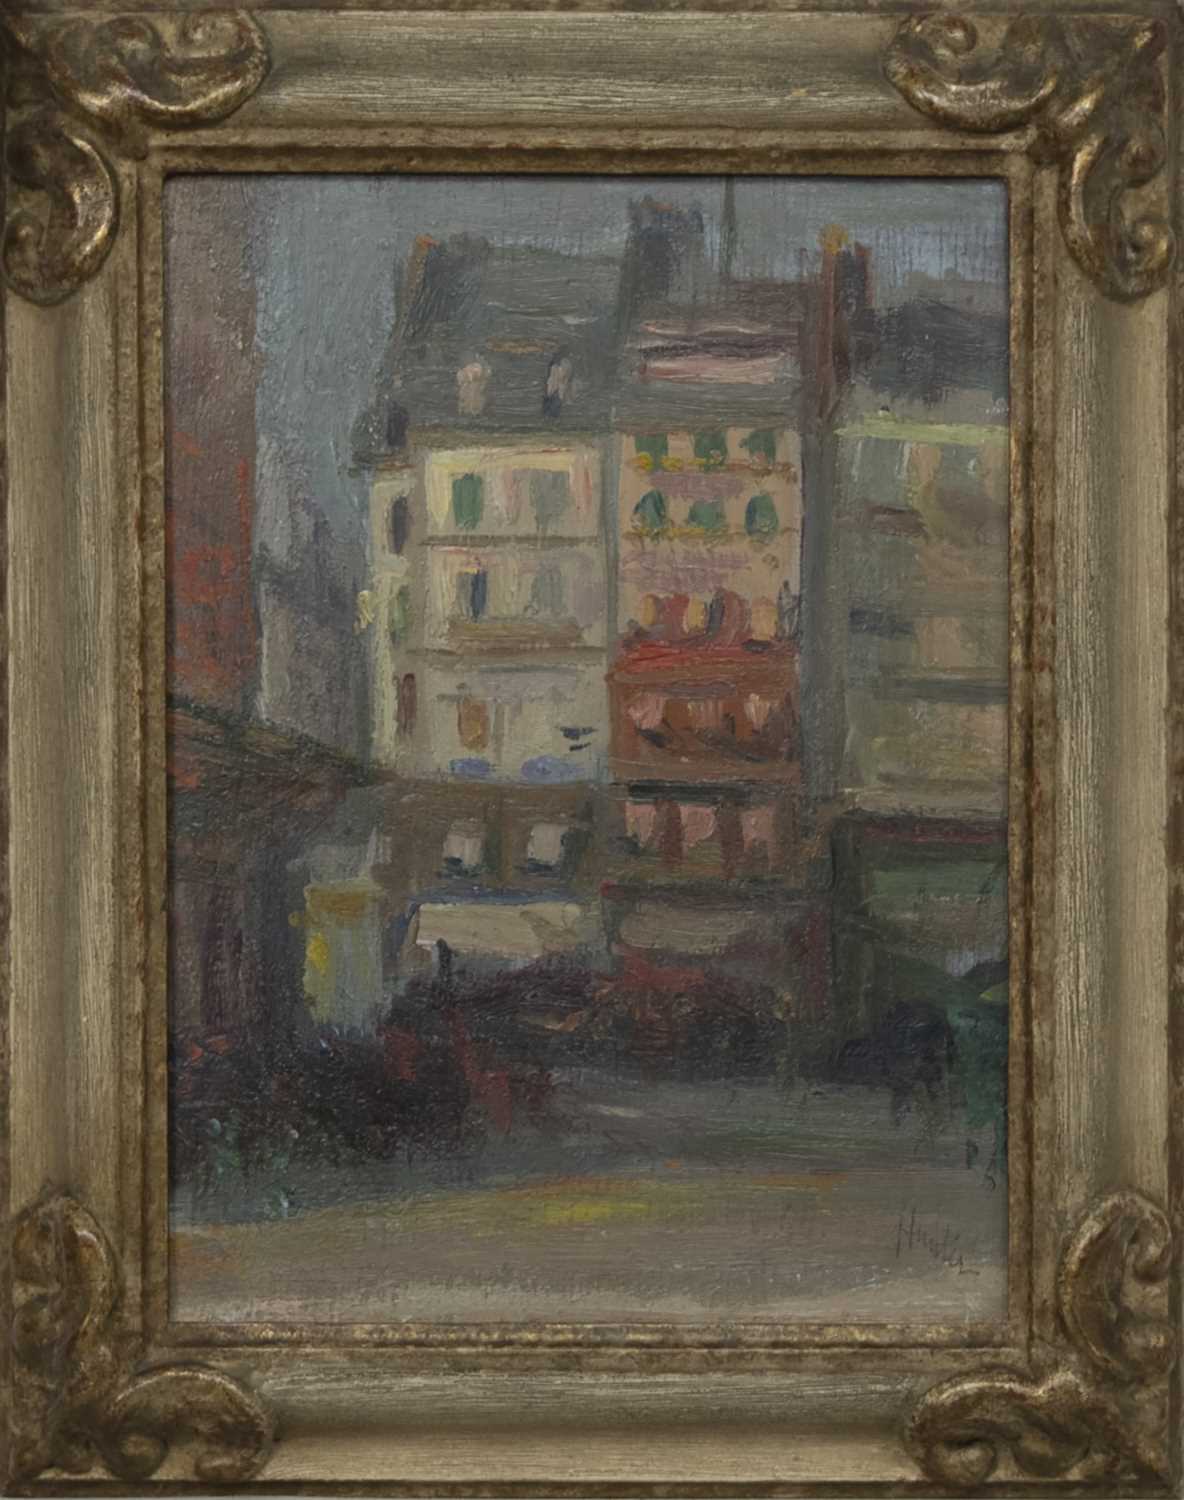 Lot 2002 - CORNER OF A SQUARE AT NIGHT, PARIS, AN OIL BY GEORGE LESLIE HUNTER